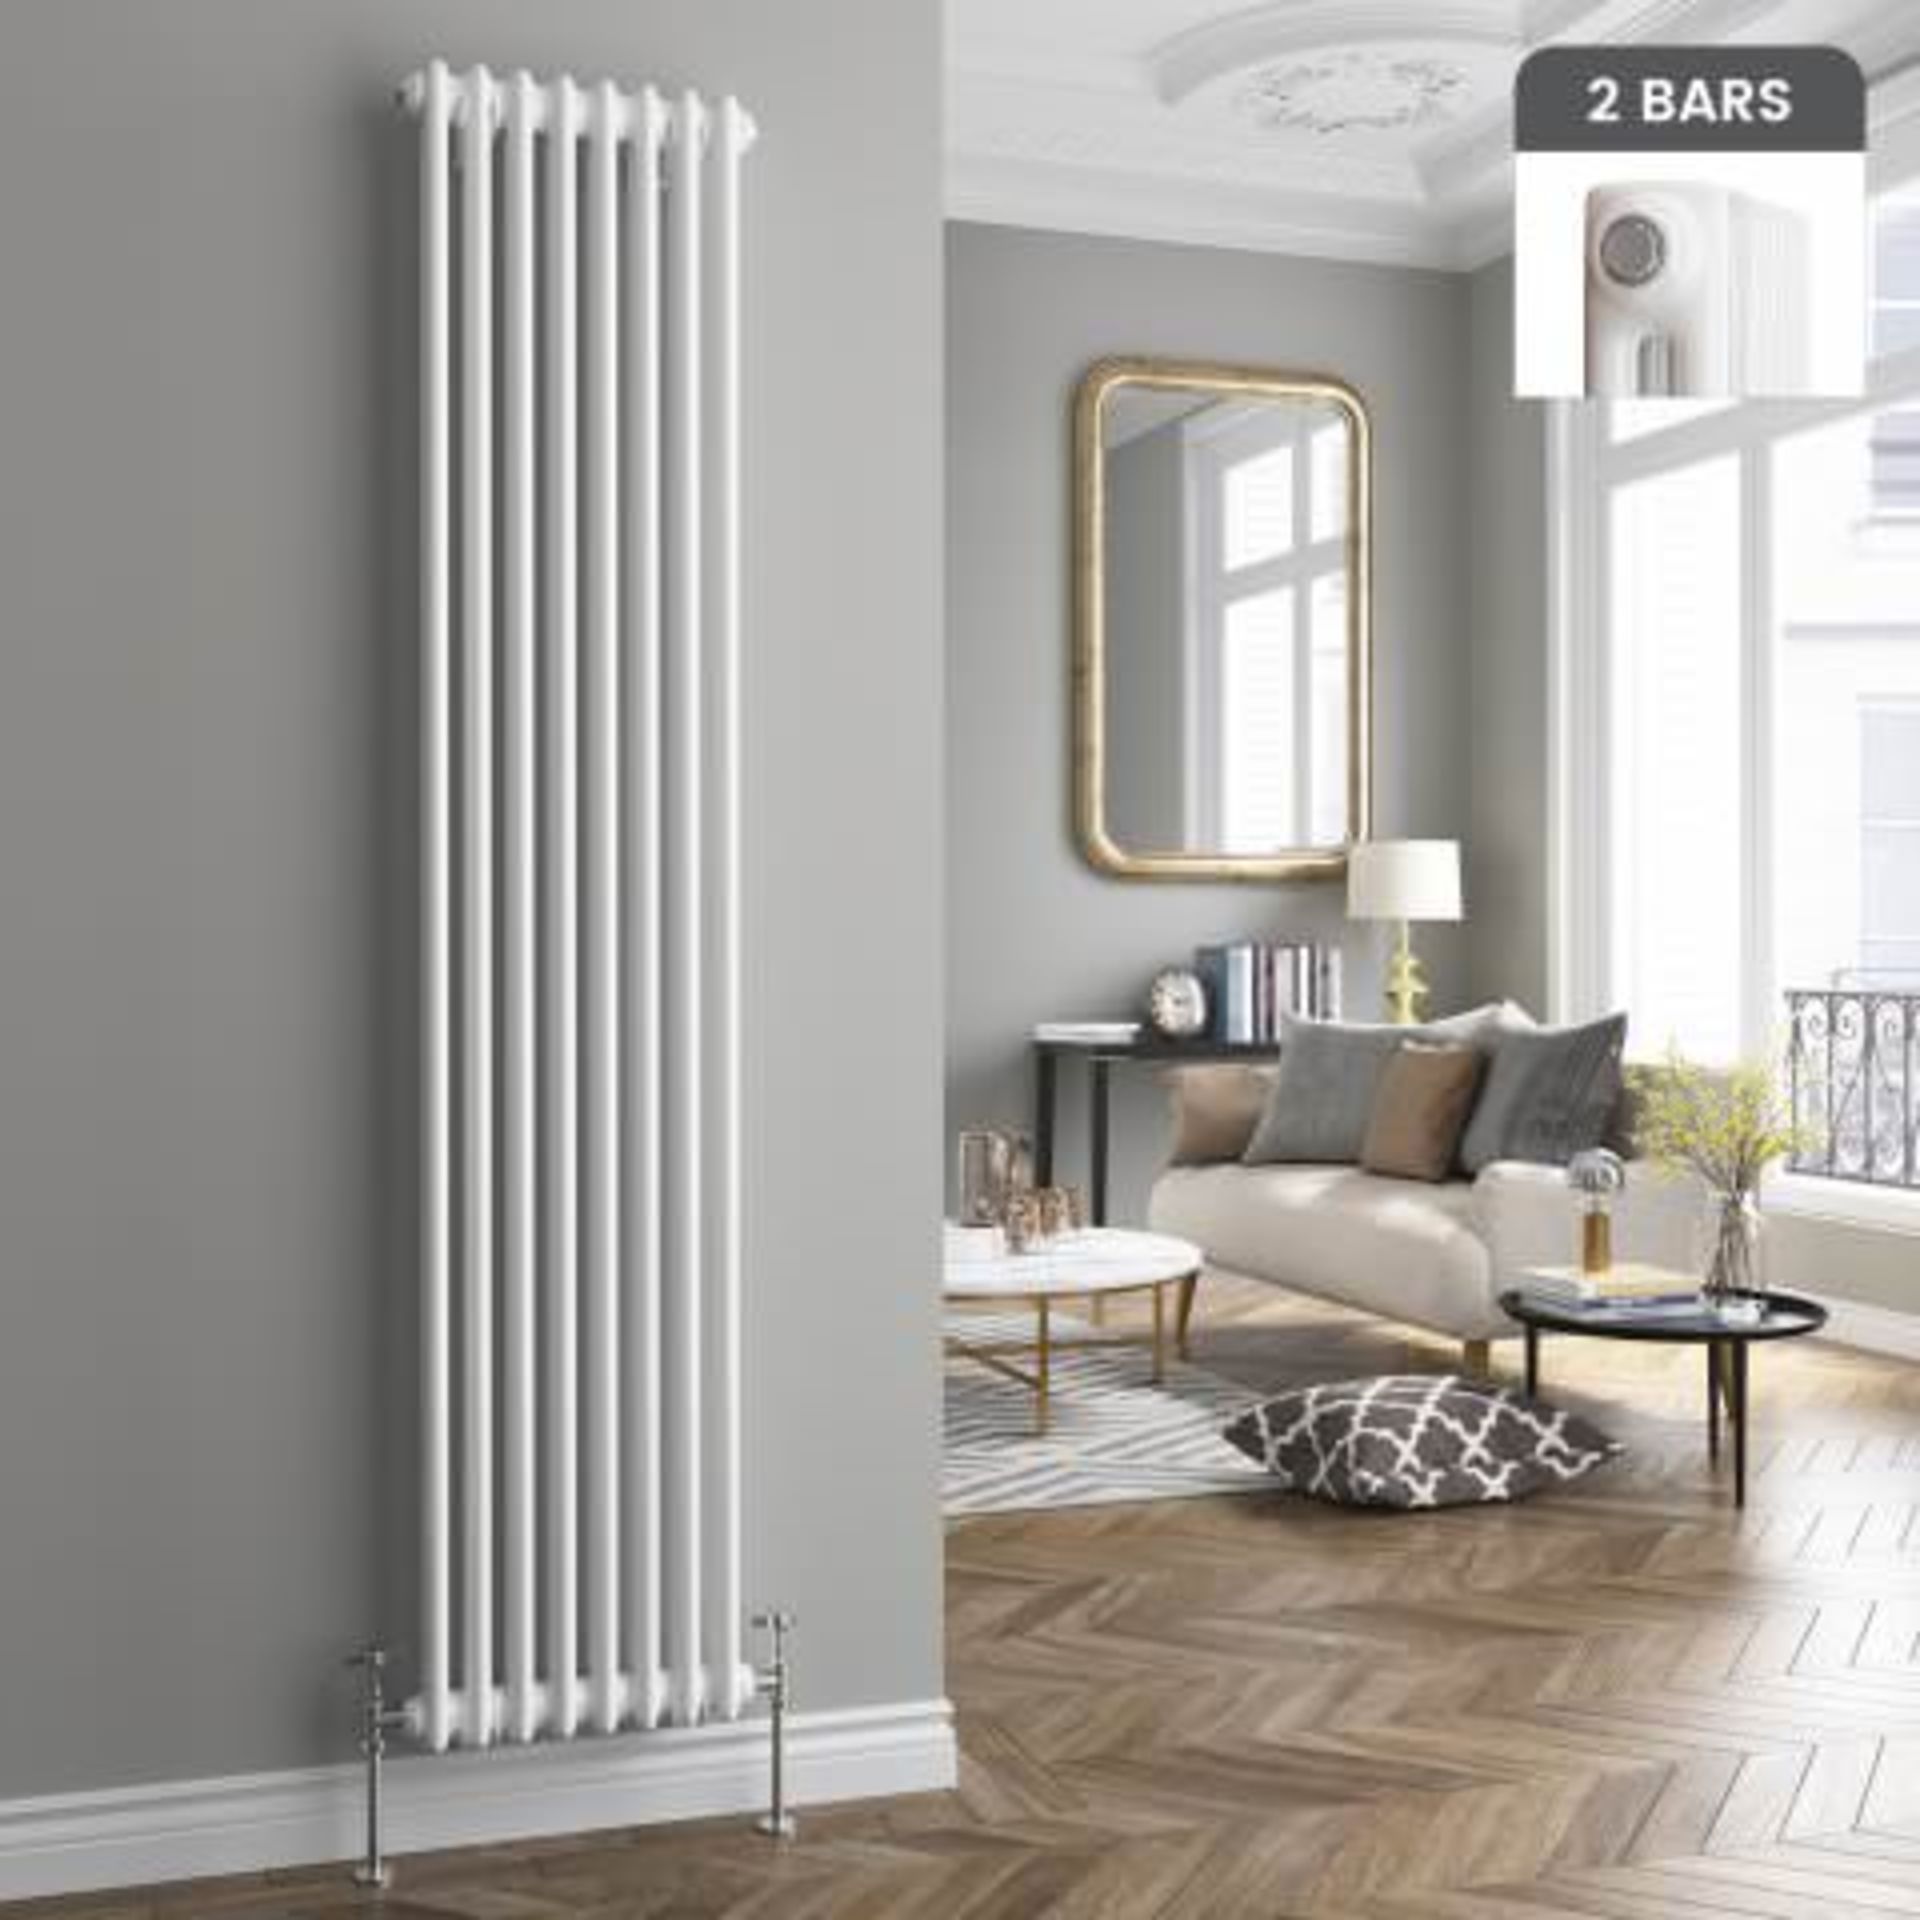 (I170) 1800x380mm White Double Panel Vertical Colosseum Traditional Radiator. RRP £355.99. For an - Image 3 of 3